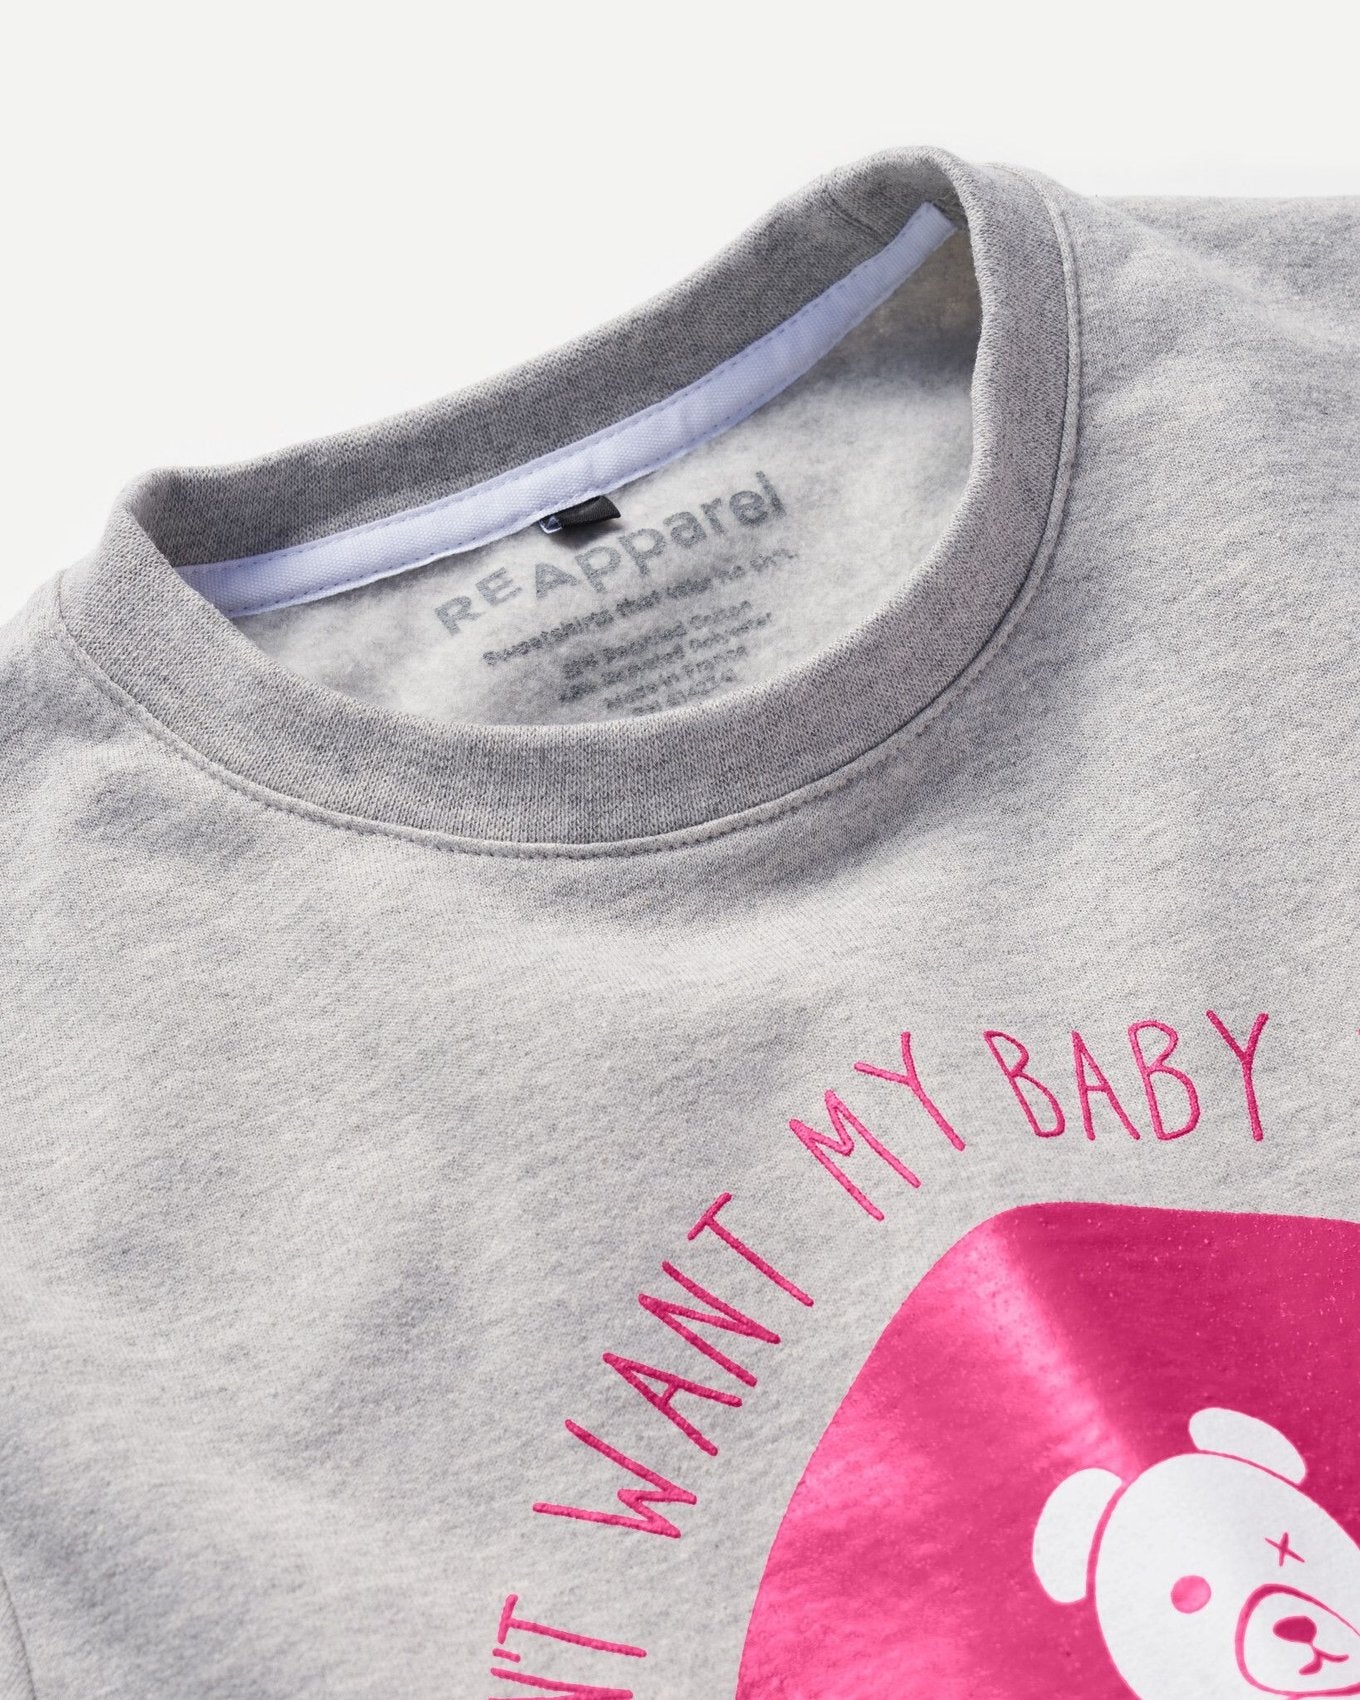 ReApparel Baby Crew Neck . in color Medium Heather Grey and shape long sleeve